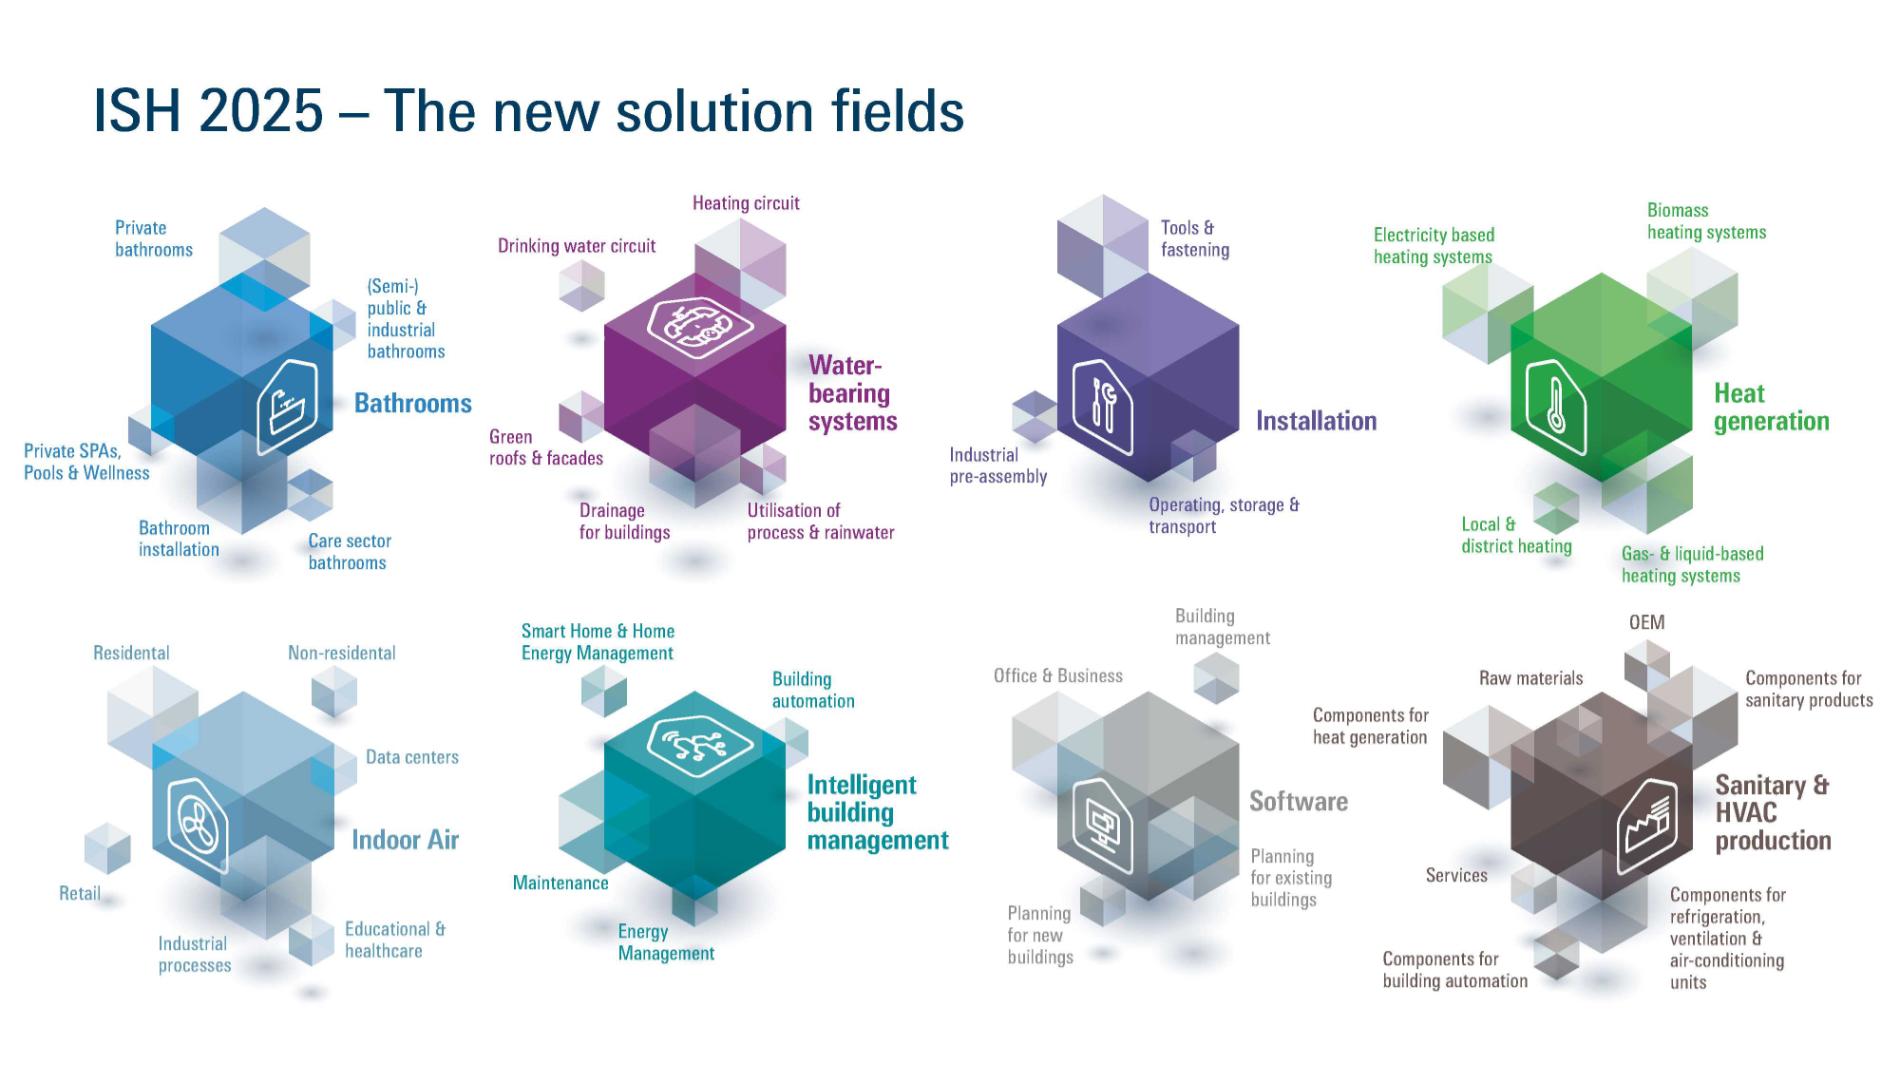 Graphic: The new solutions for users